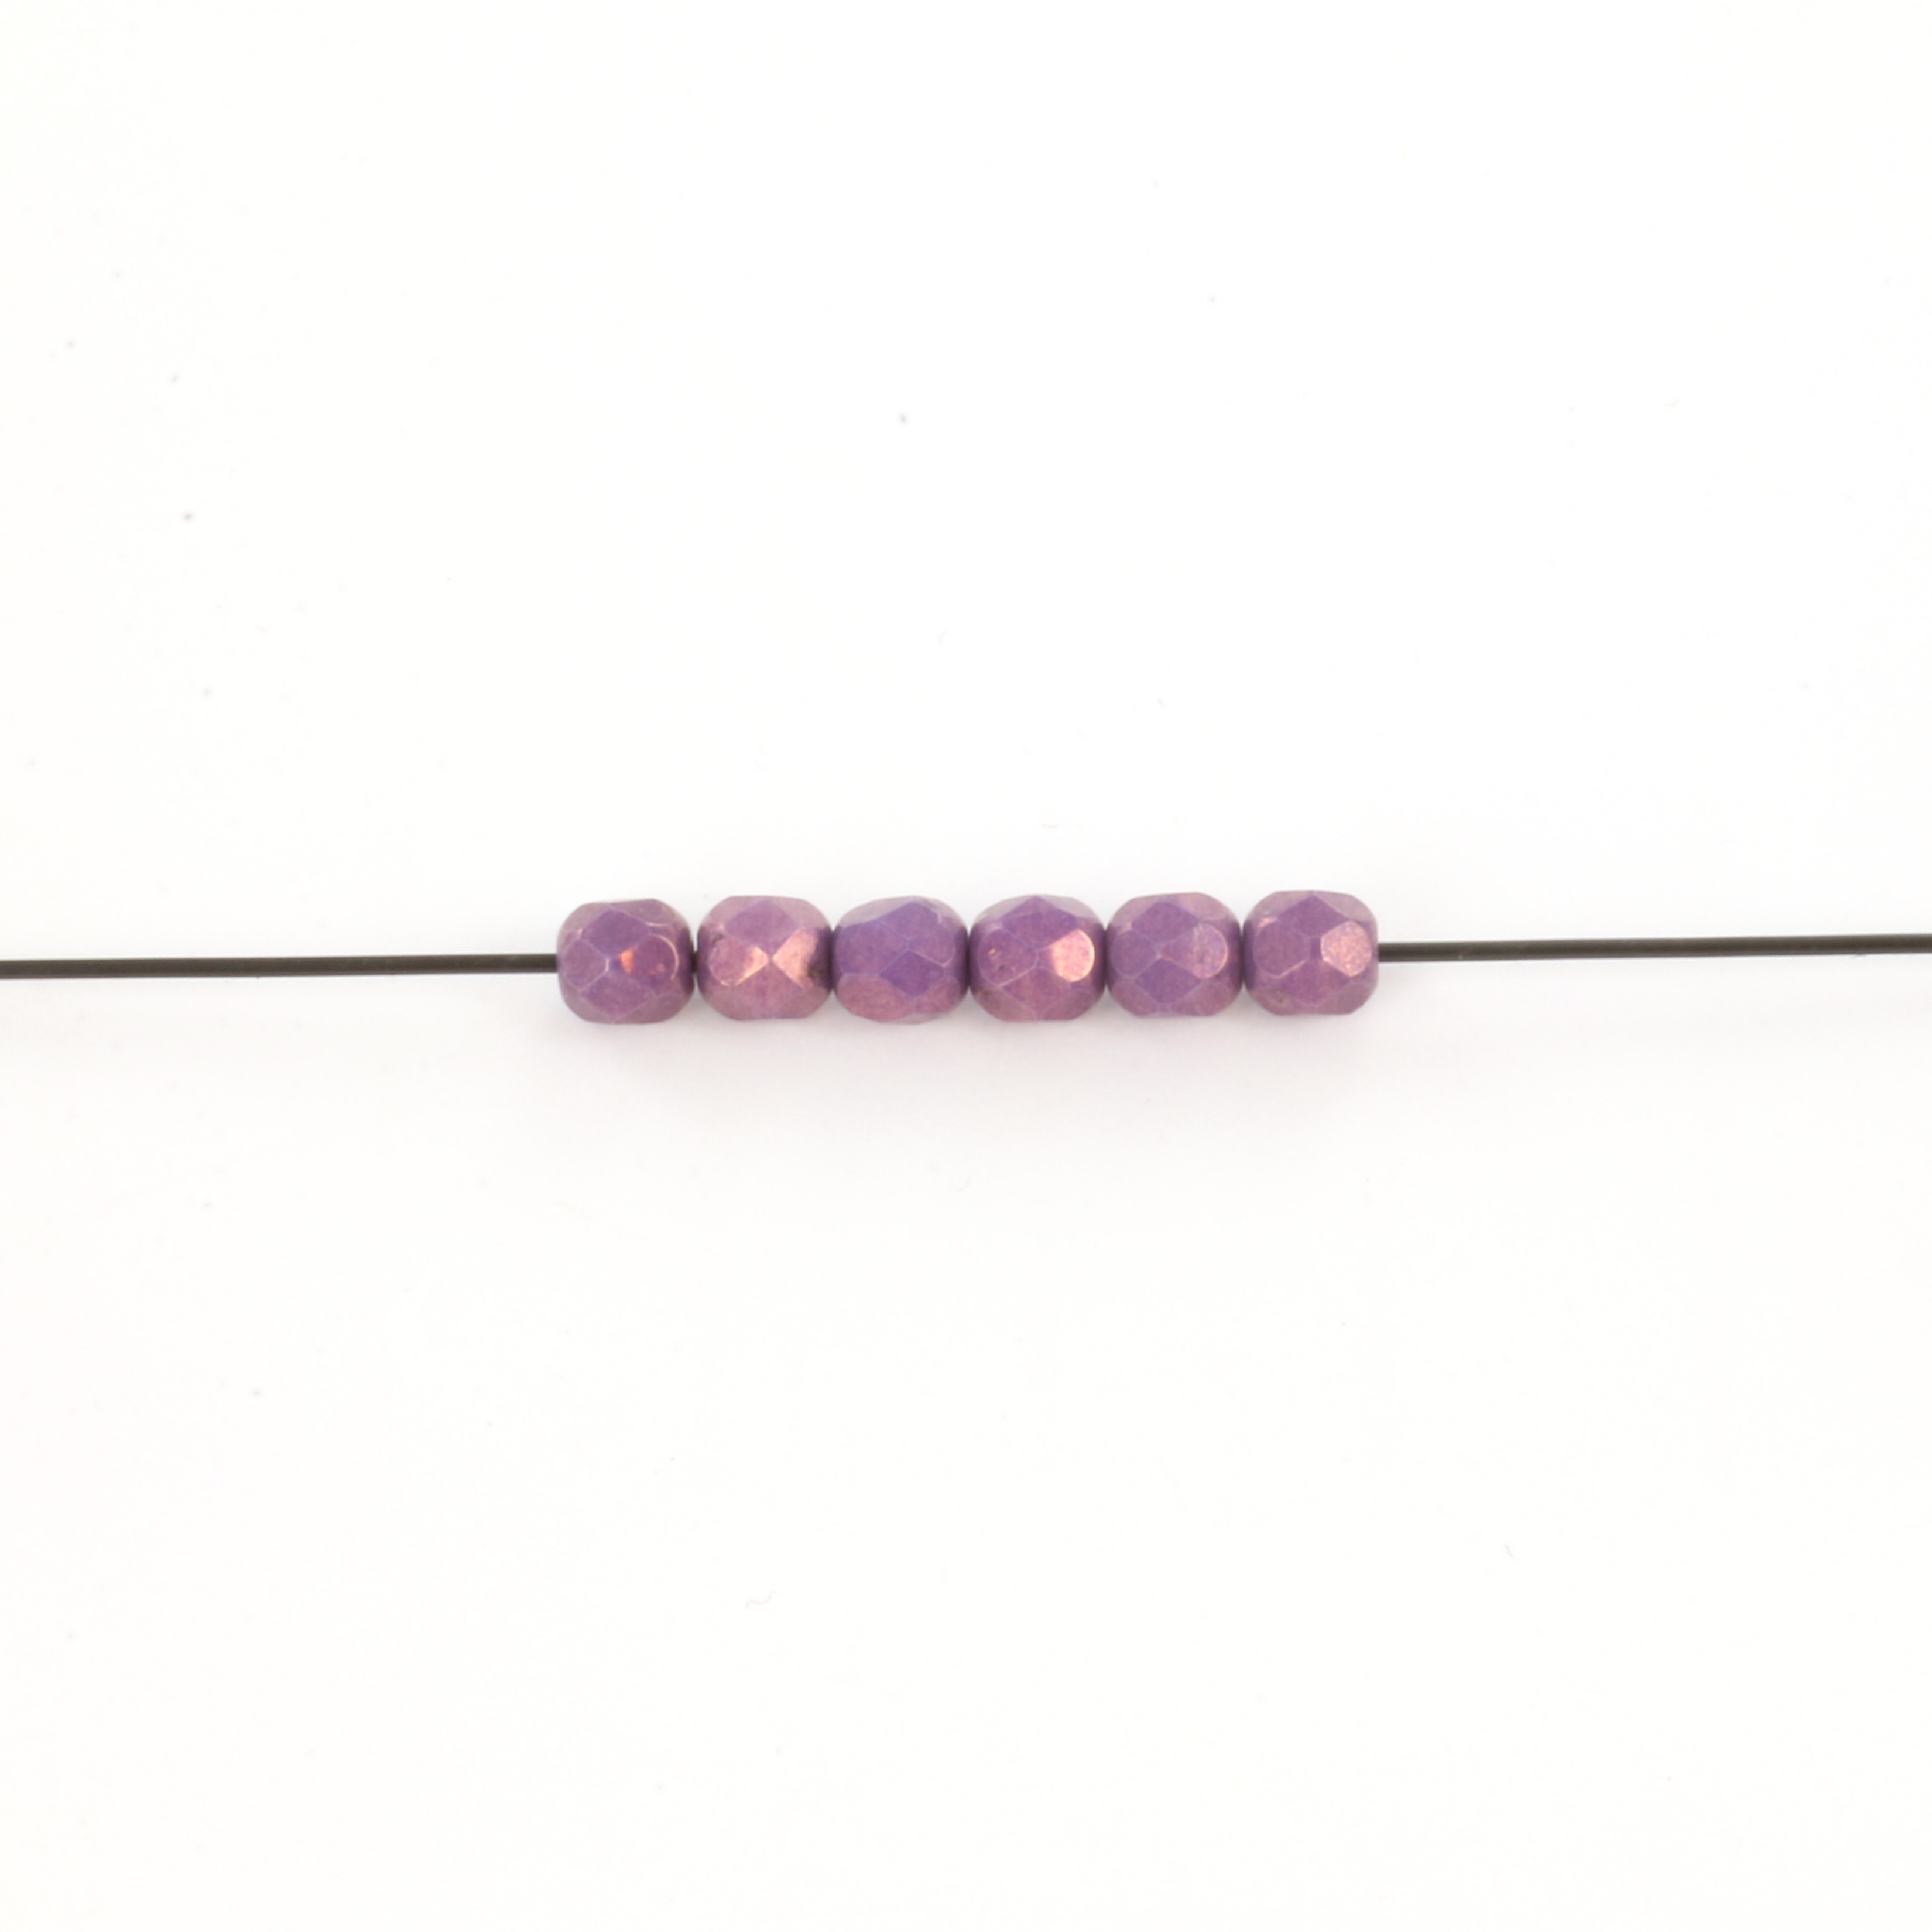 Extra pictures Czech faceted round 4 mm - purple vega luster